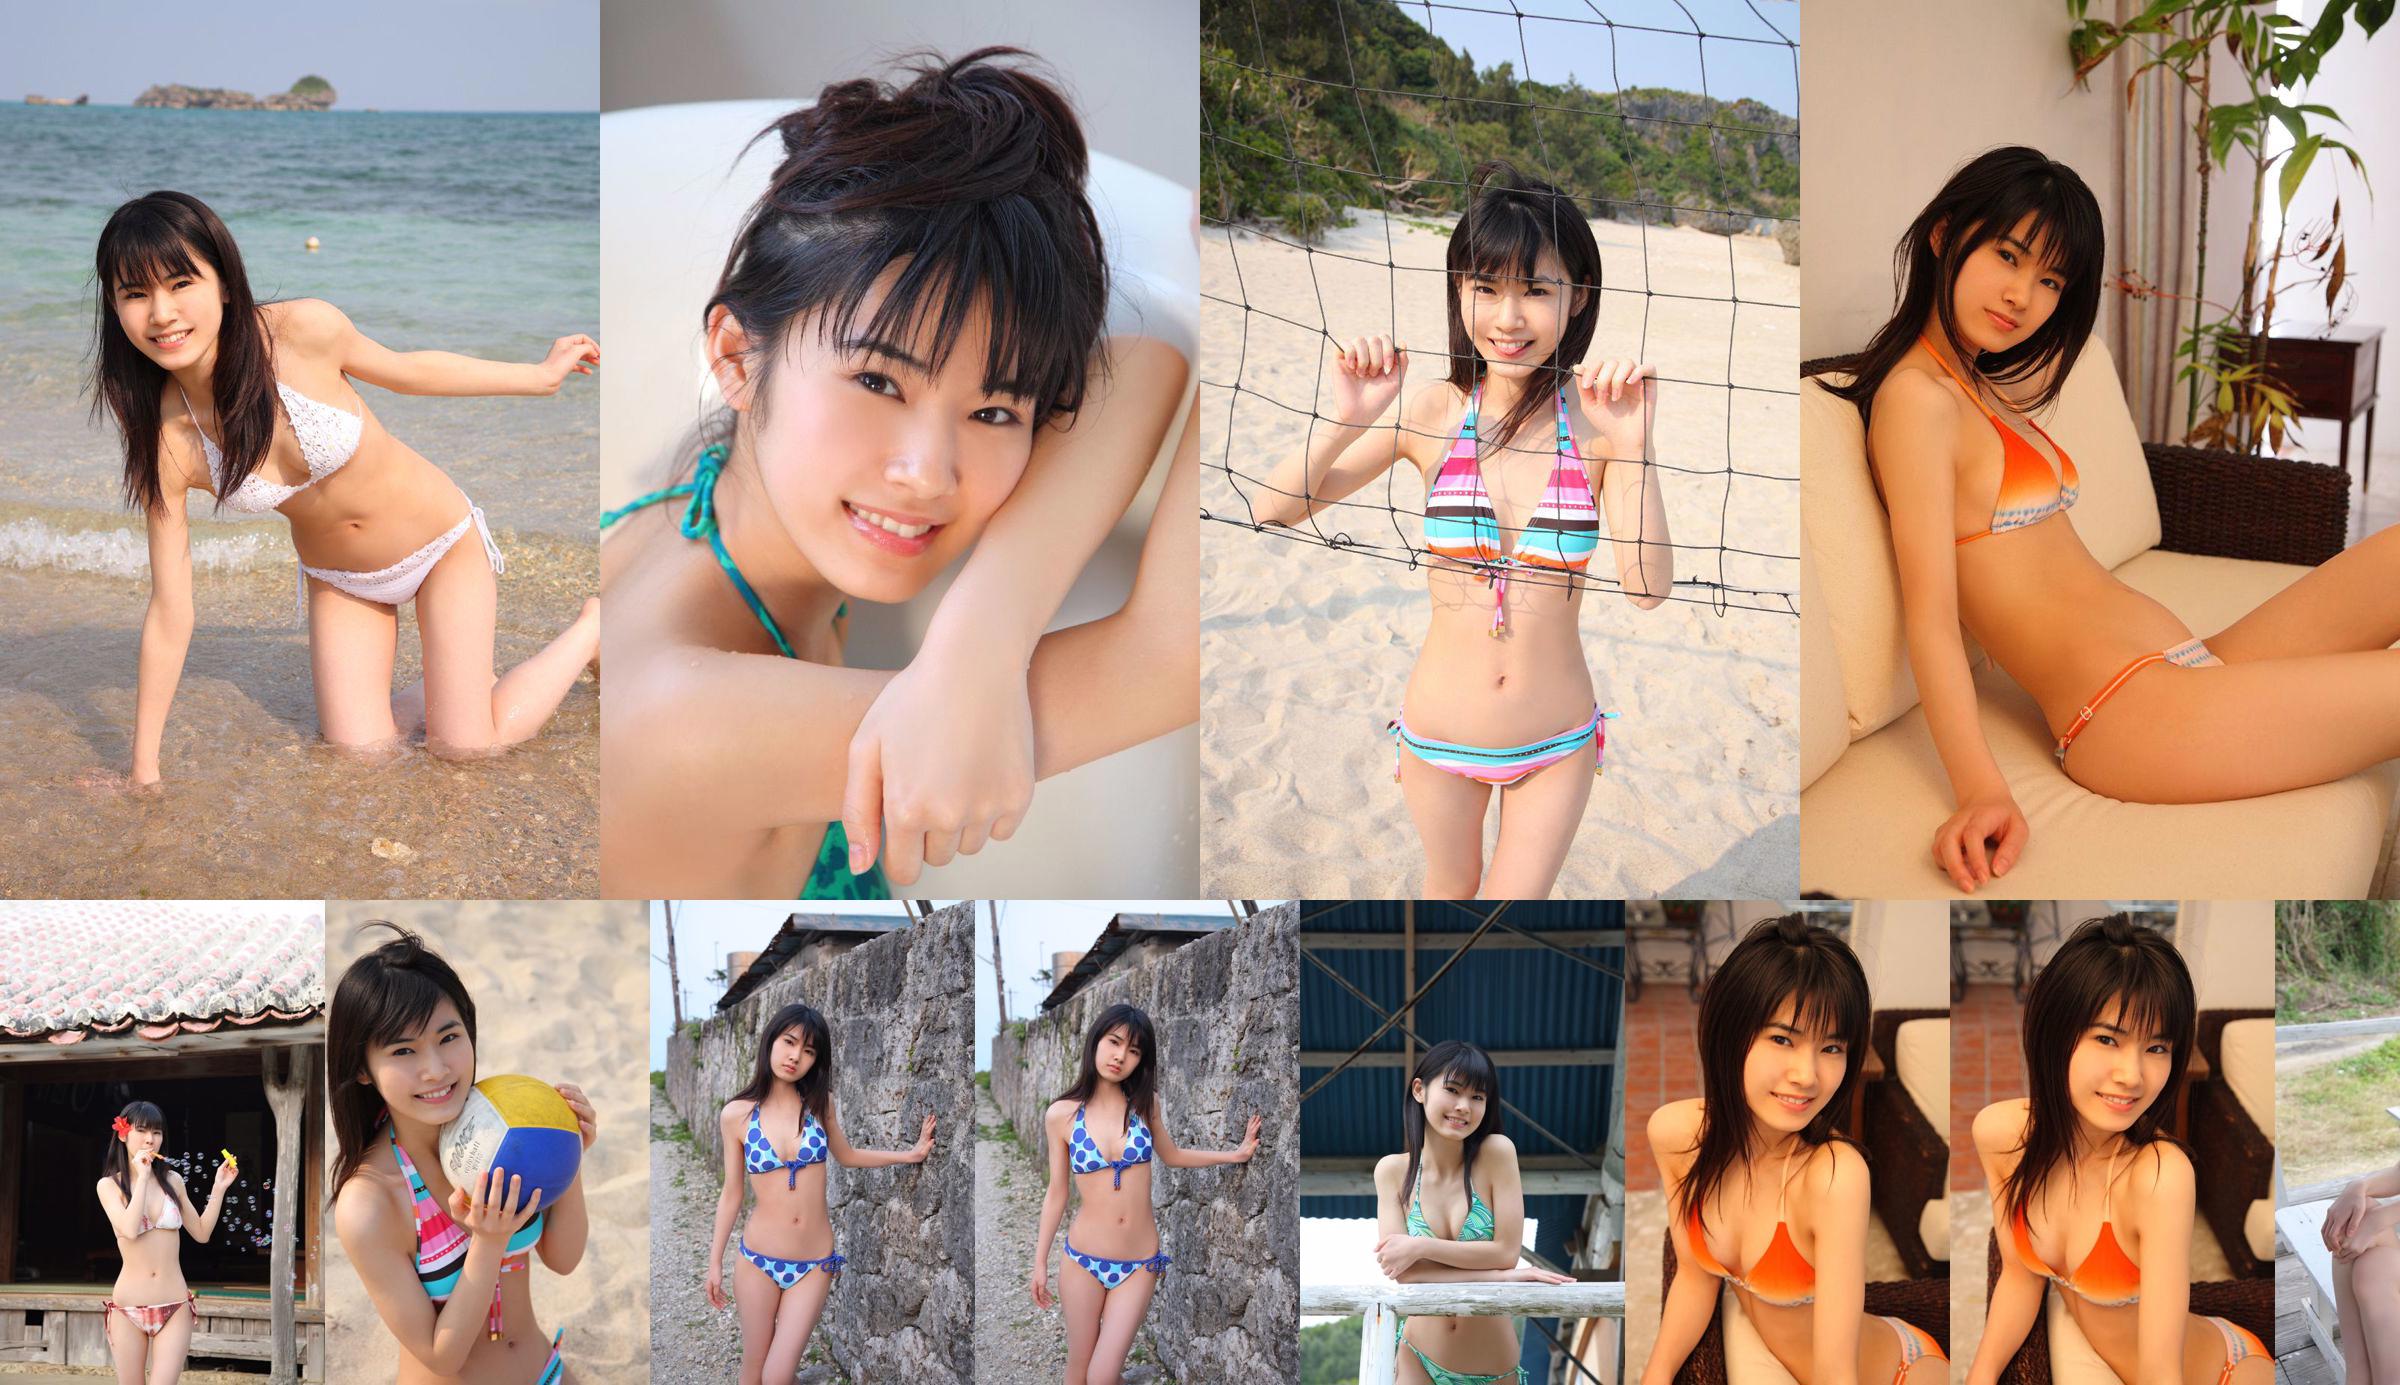 Mai Iwata "My ☆ Remembrance Day" [For-side] No.546dce Pagina 1